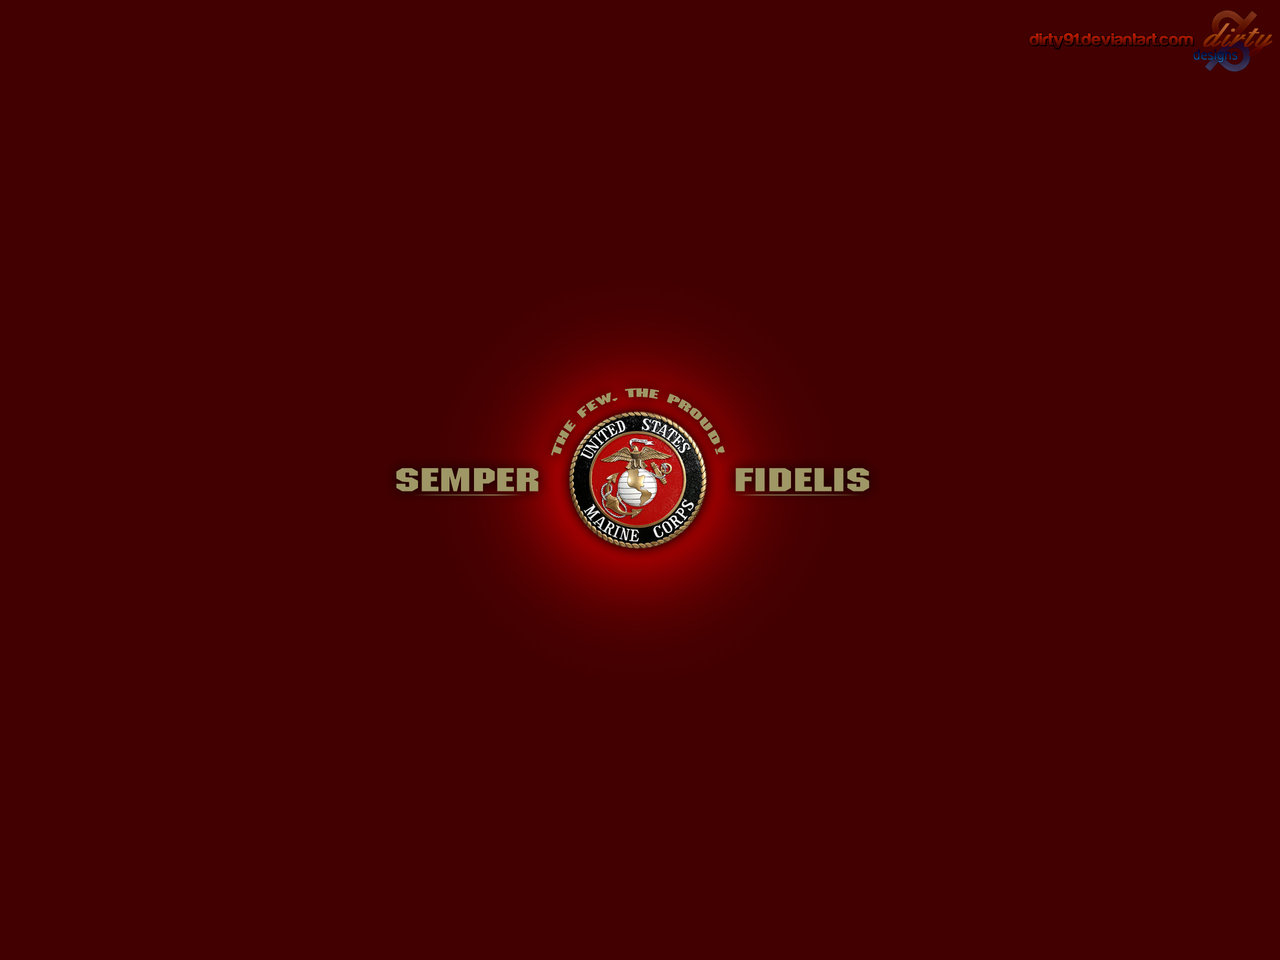 Usmc Wallpaper Now In HD By Dirty91 Customization Other